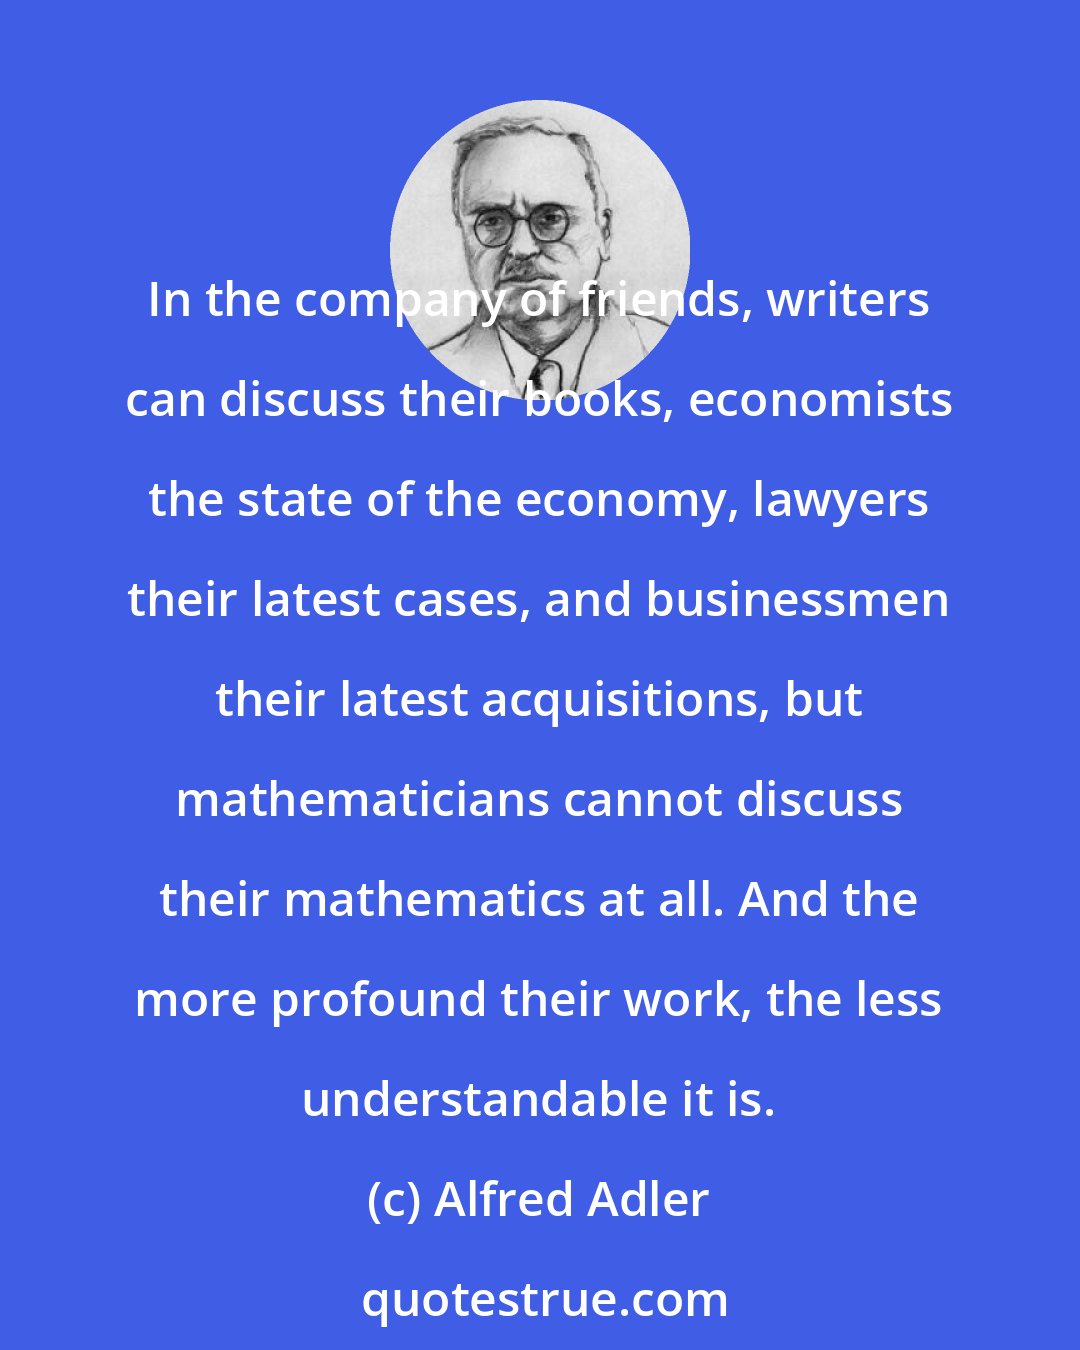 Alfred Adler: In the company of friends, writers can discuss their books, economists the state of the economy, lawyers their latest cases, and businessmen their latest acquisitions, but mathematicians cannot discuss their mathematics at all. And the more profound their work, the less understandable it is.